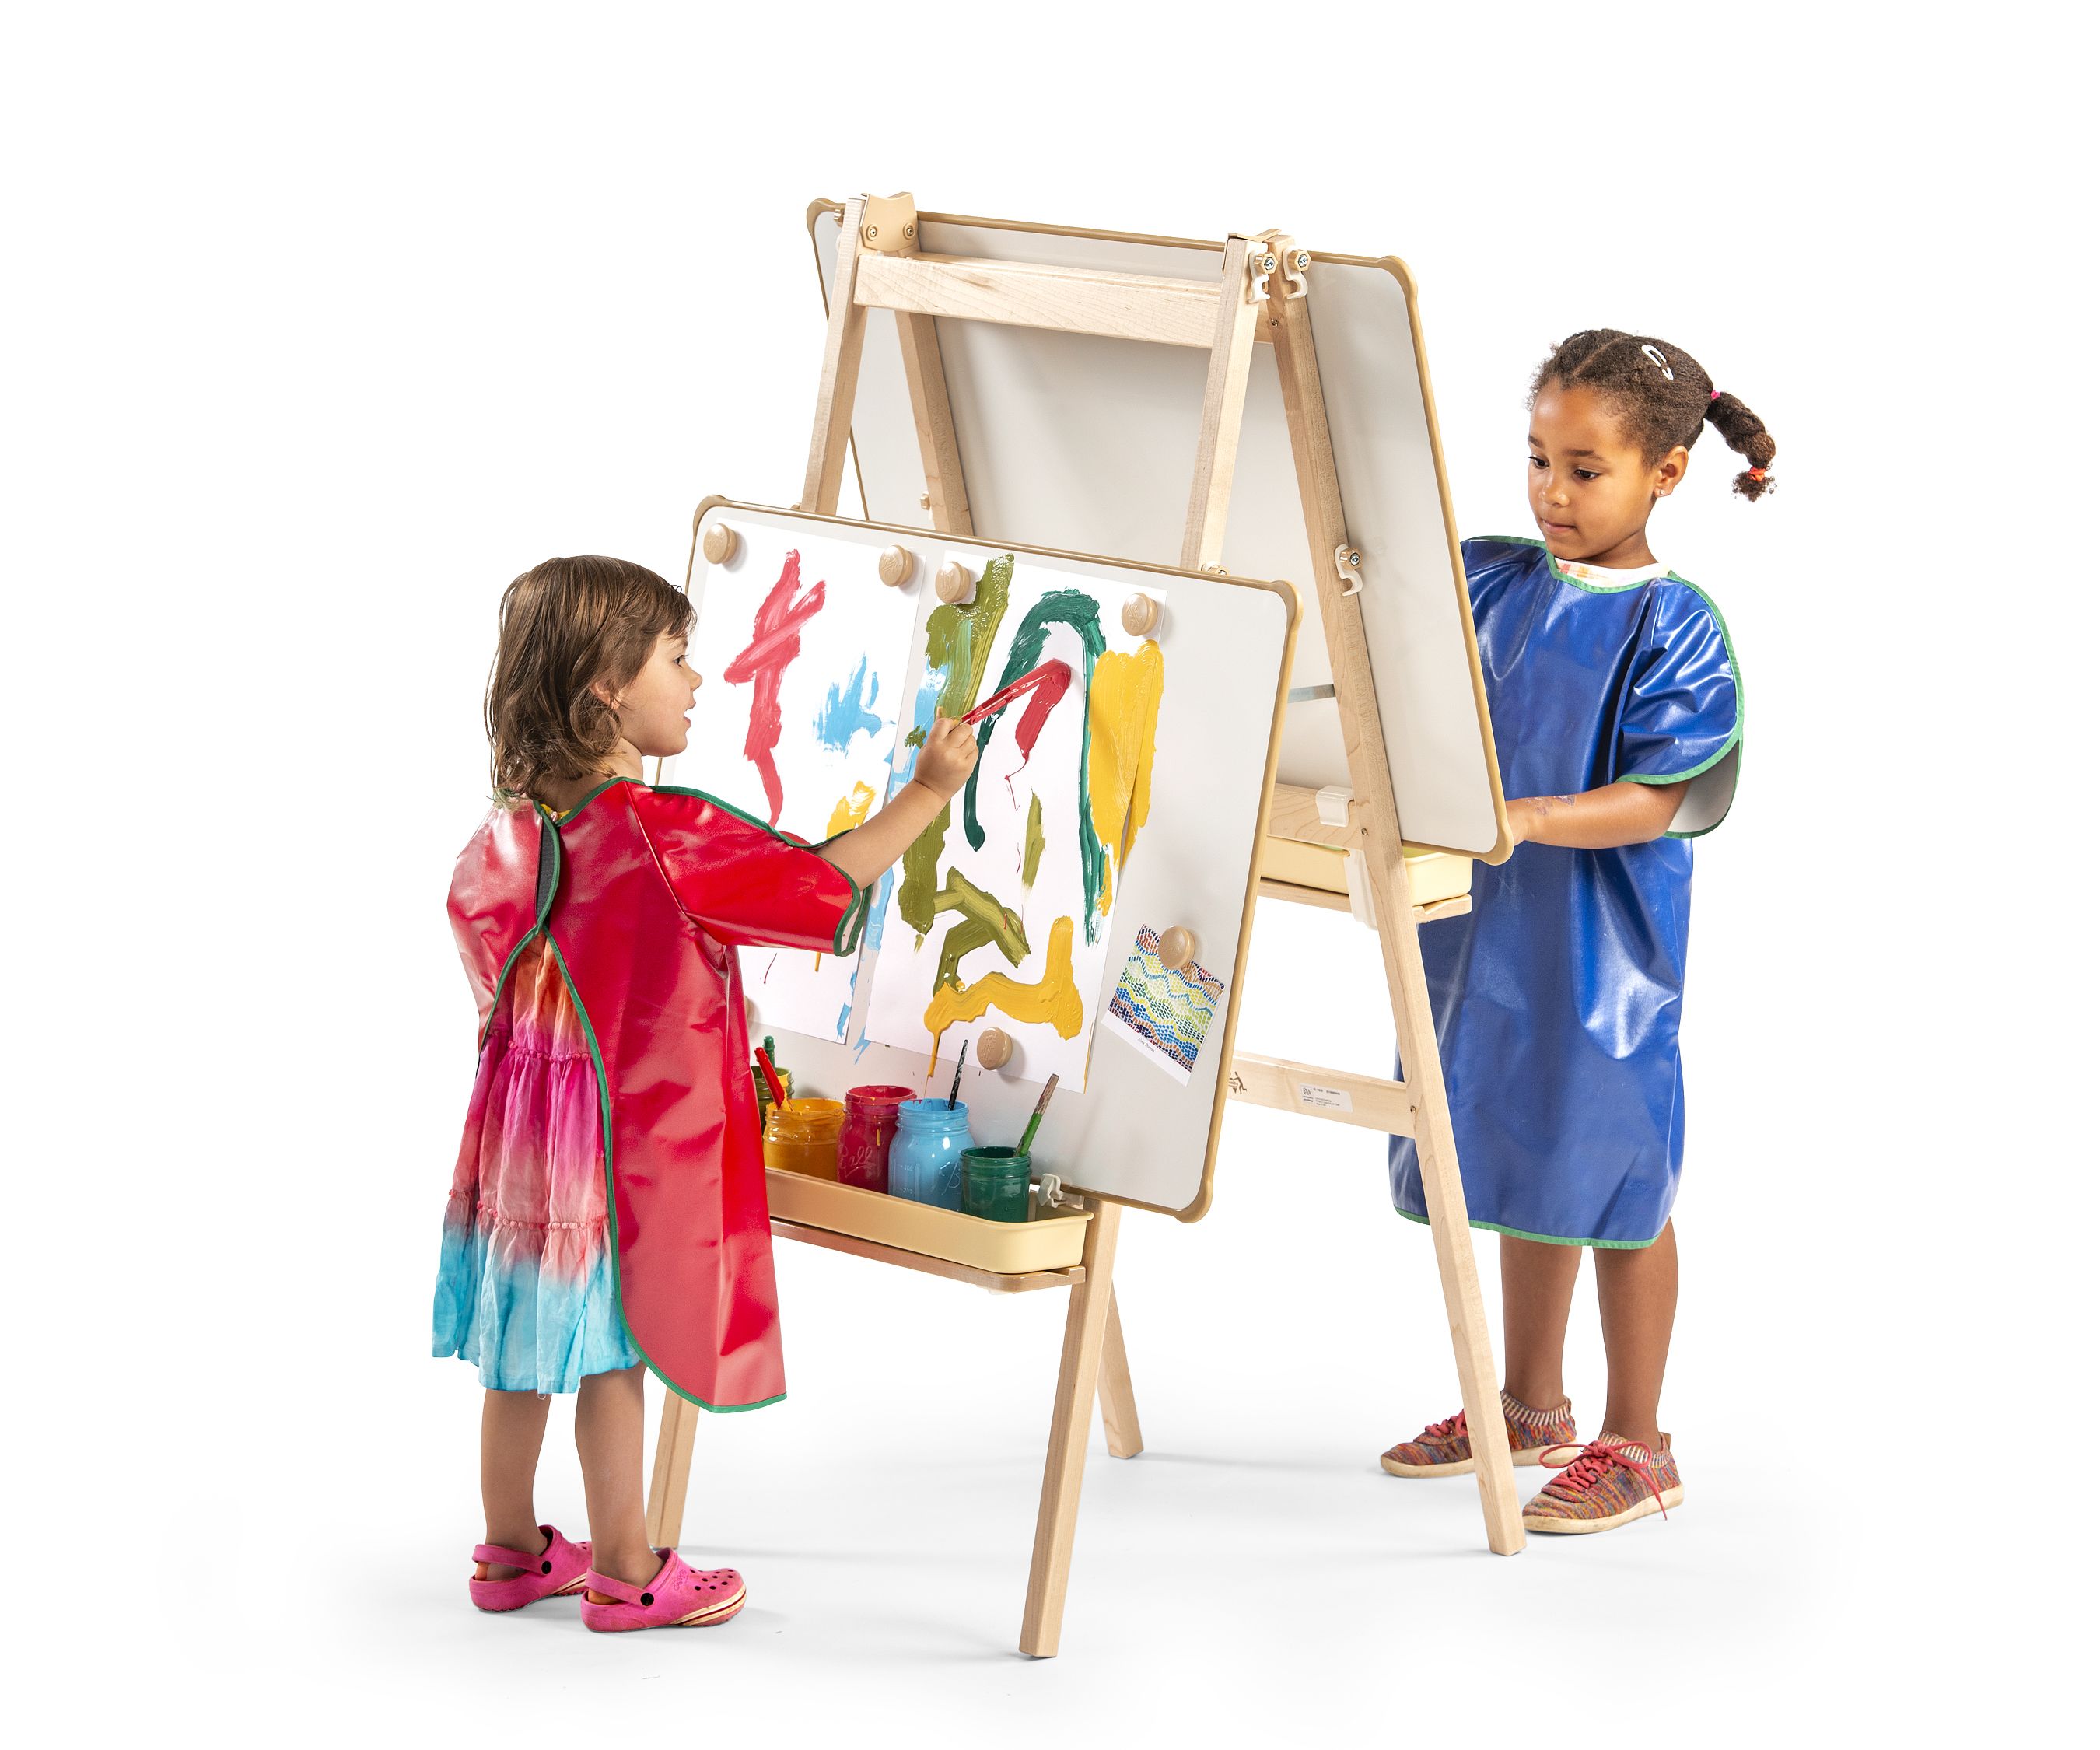 https://www.communityplaythings.com/-/media/images/product-images/art-and-science/art/product-images/h820-multipurpose-easel/h820-in-use.ashx?rev=fb66a319ba7341efb07d611861526007&hash=171CF881A4354F59B9DD60BB9170AF43